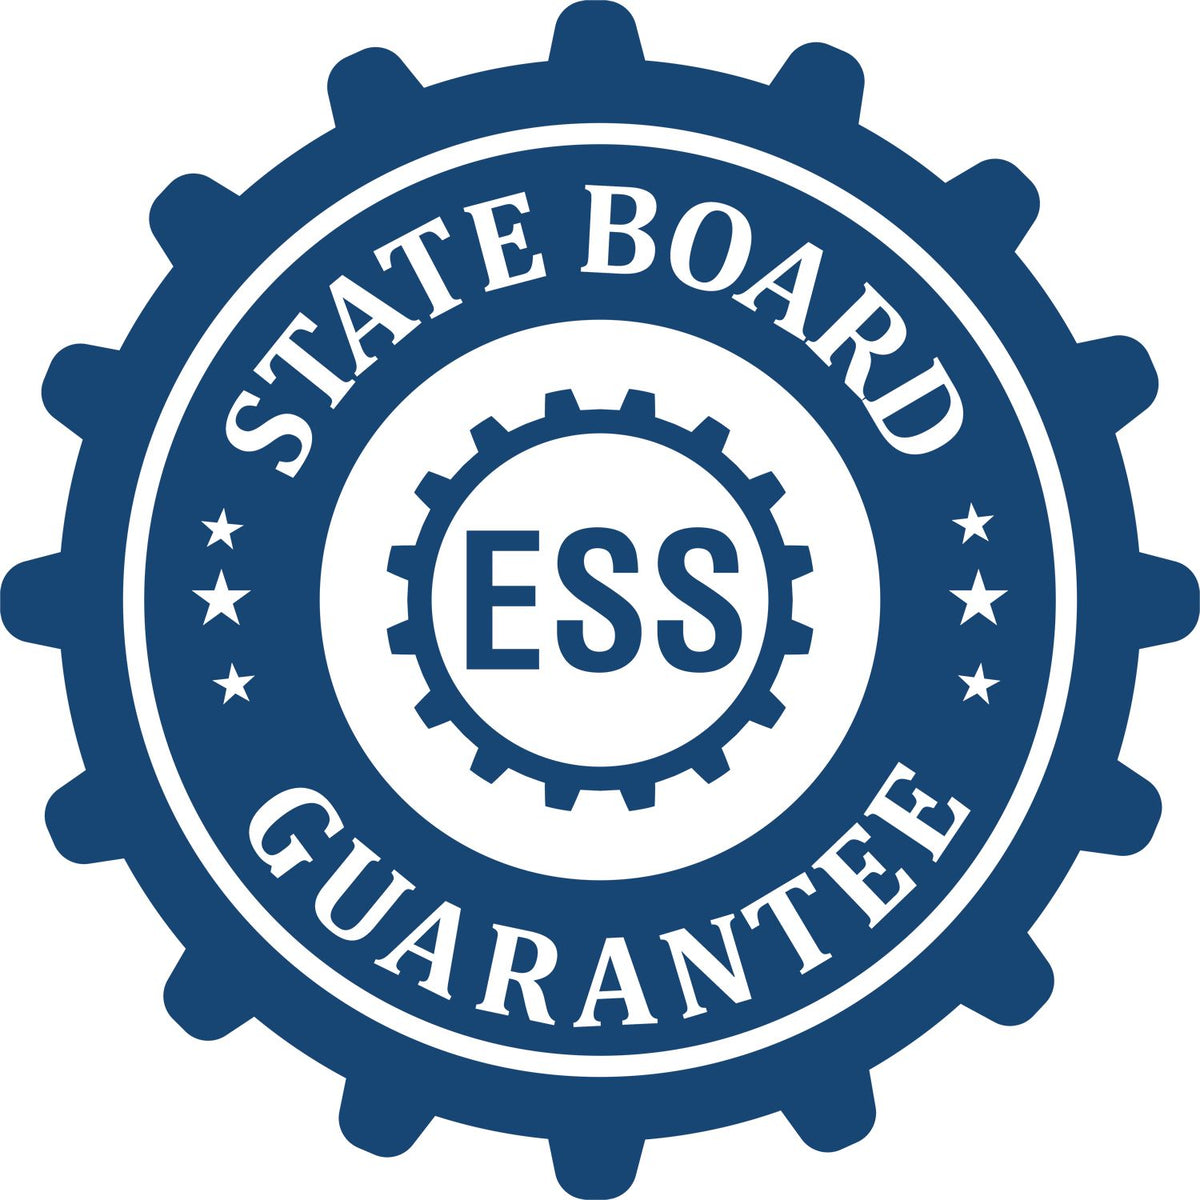 An emblem in a gear shape illustrating a state board guarantee for the Heavy-Duty Missouri Rectangular Notary Stamp product.